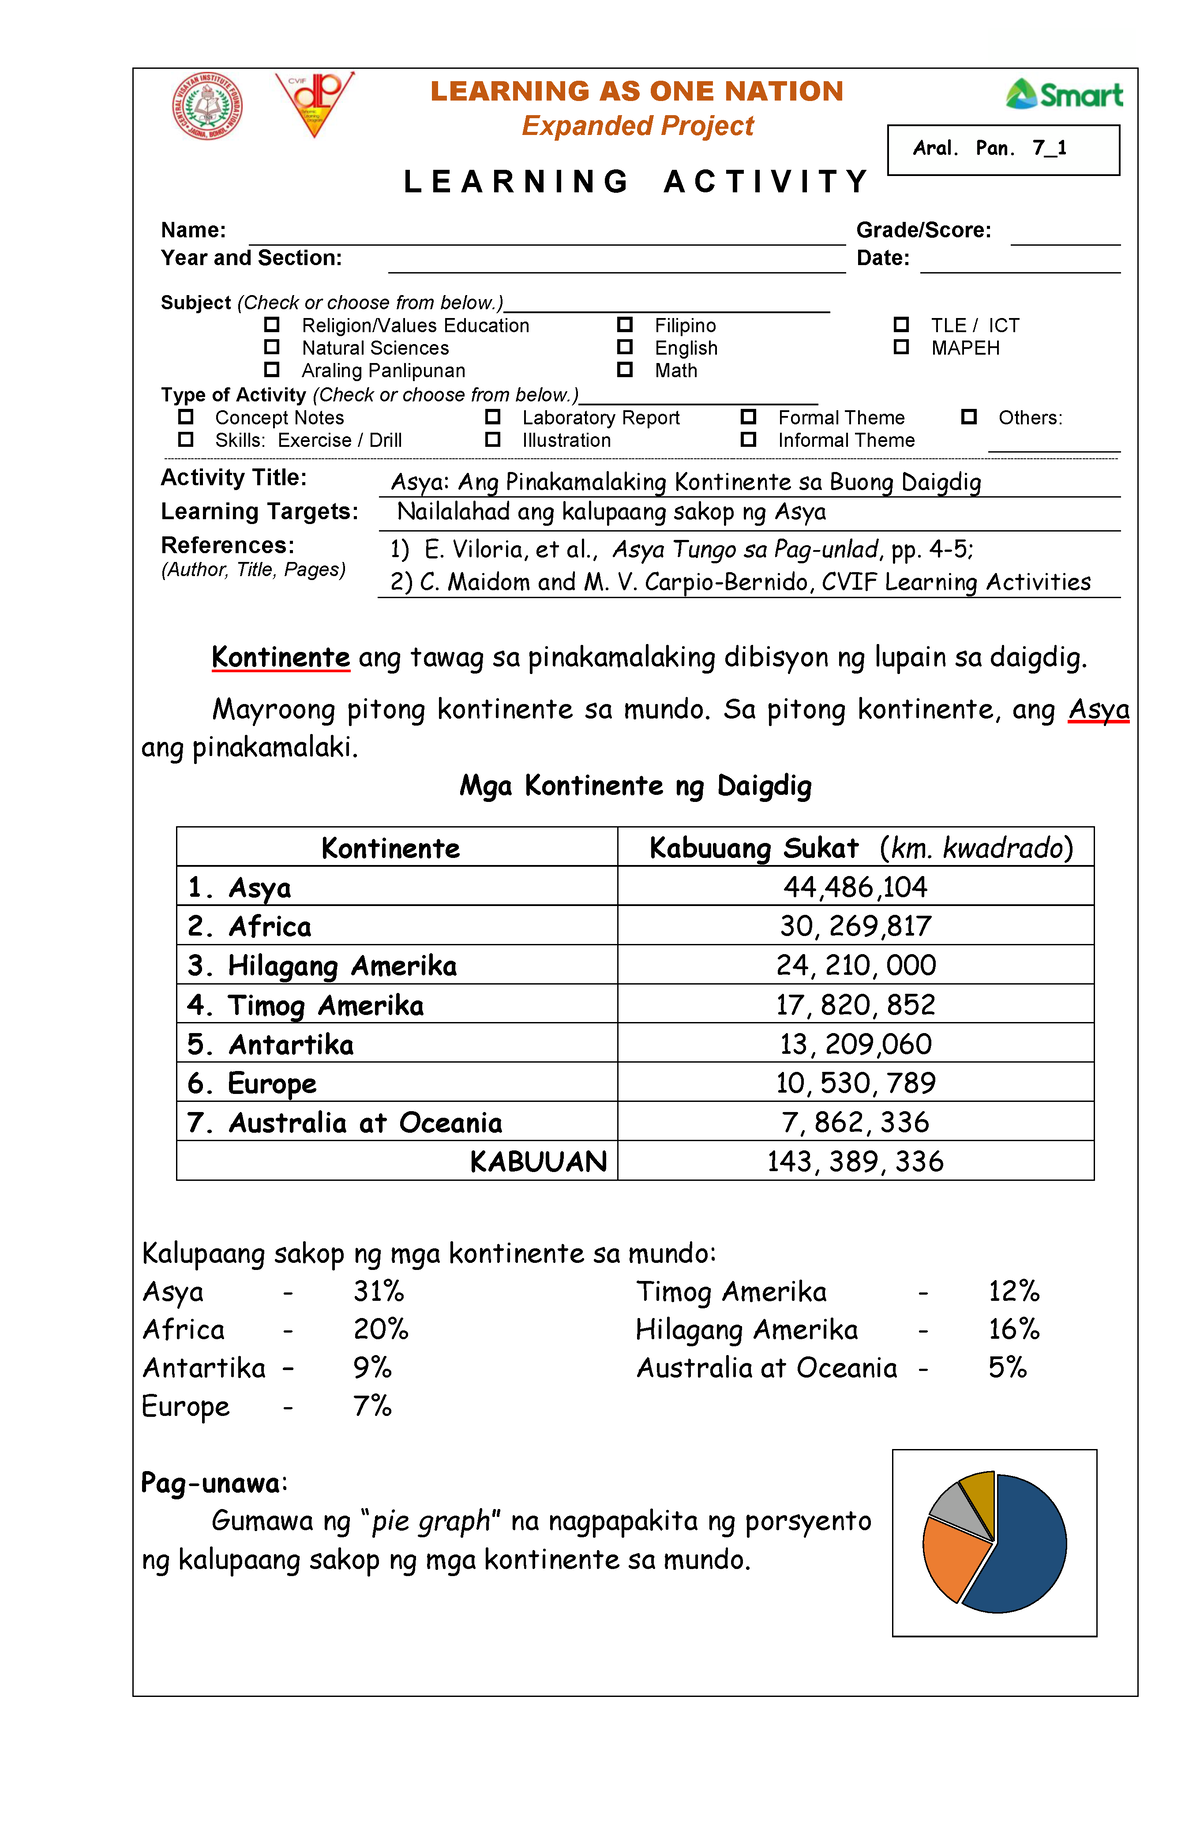 Aral Pan 7 LAS 1 Asya - learning activity sheet - LEARNING AS ONE